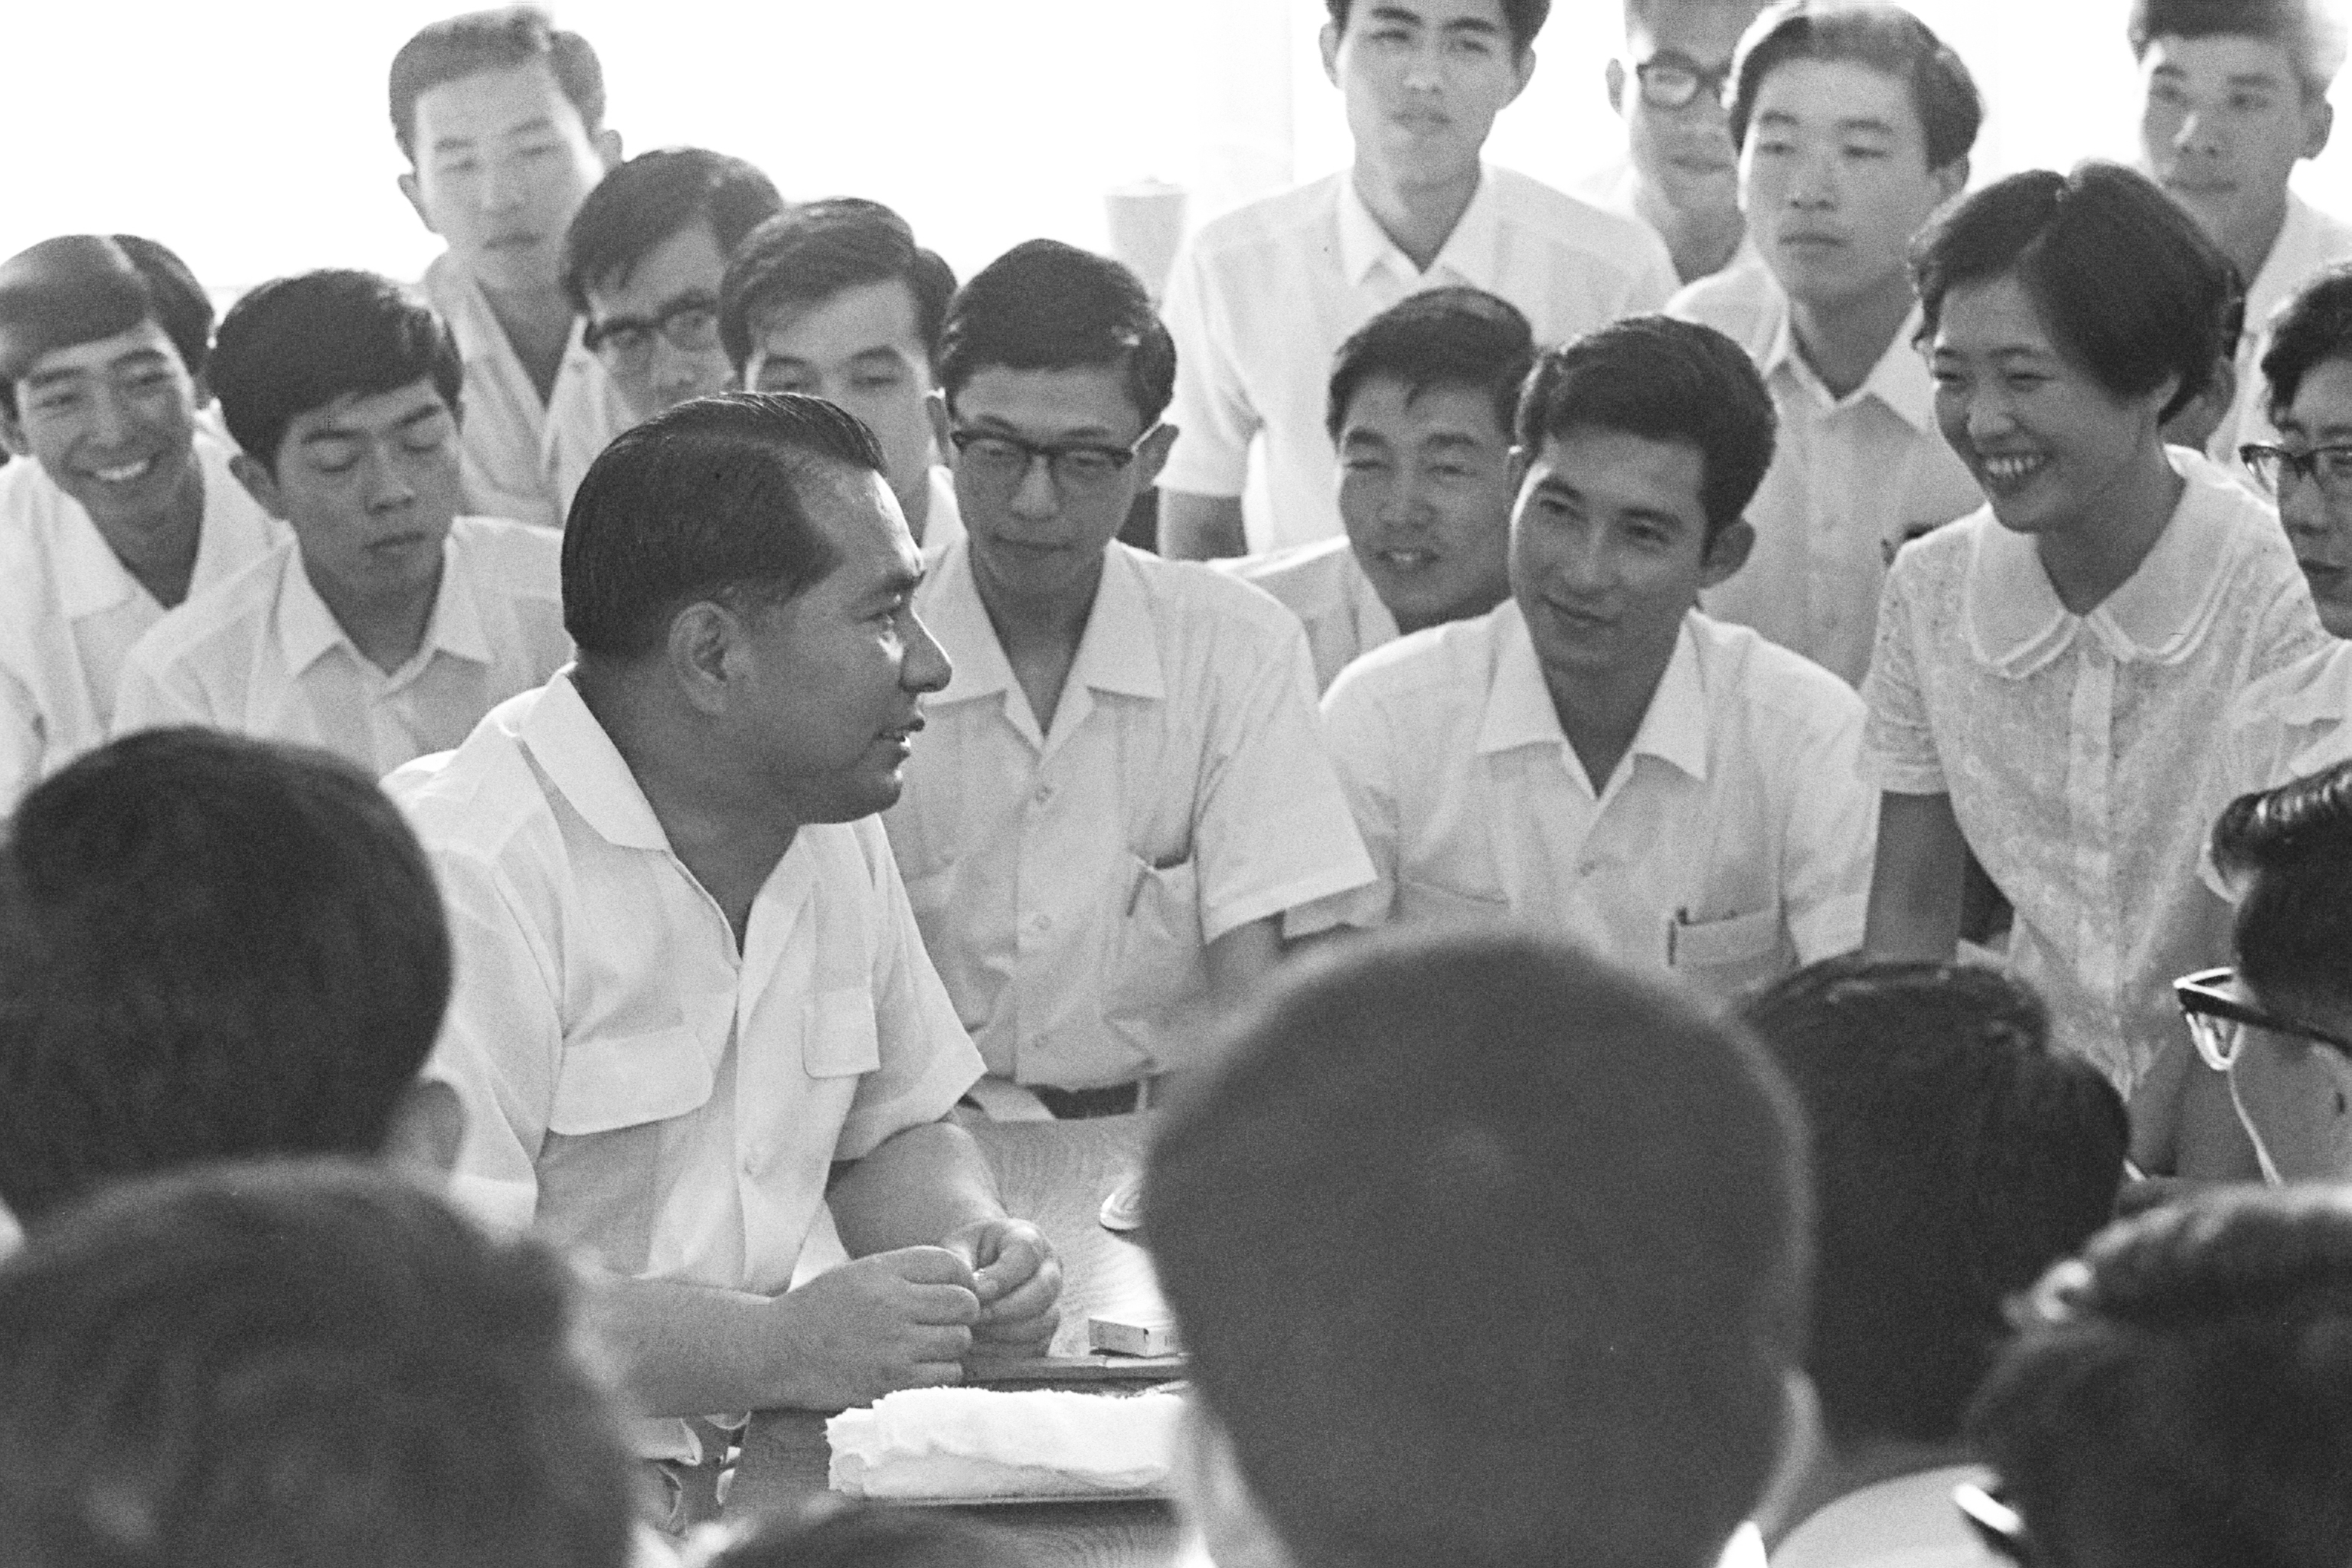 Ikeda having a discussion with Student Division members (Shizuoka, August 7, 1968)